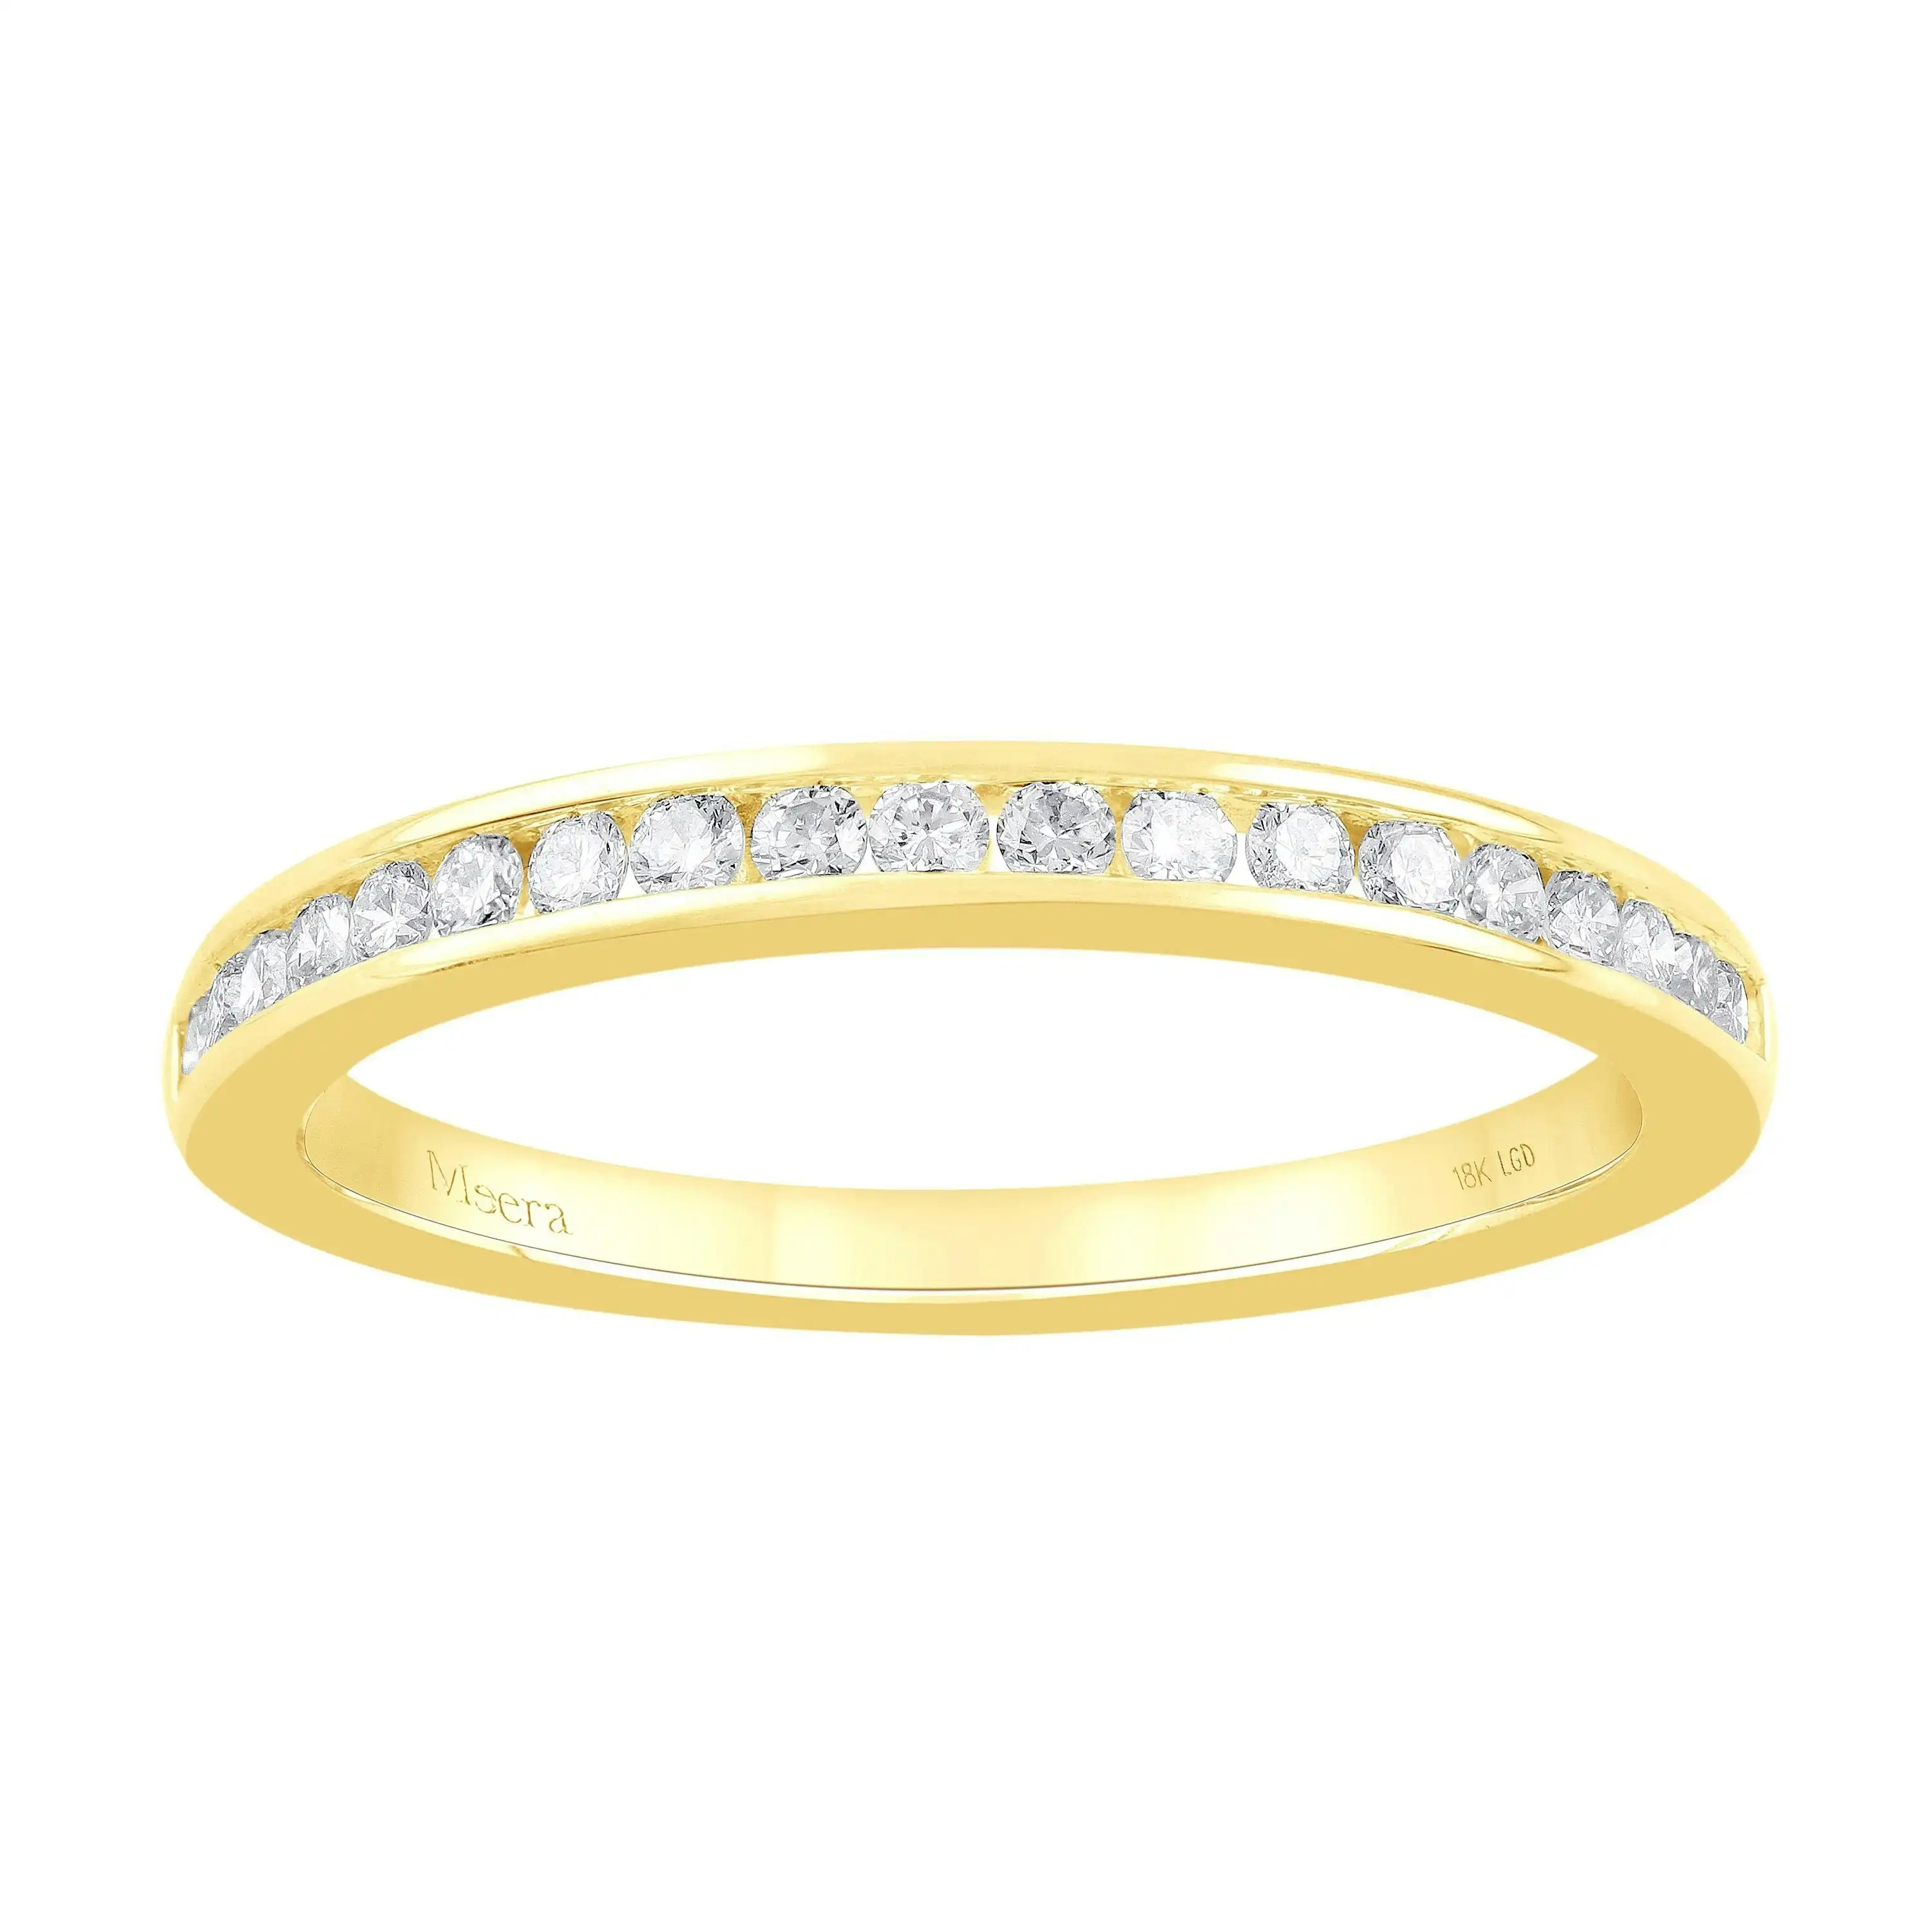 Meera Eternity Ring with 1/4ct of Laboratory Grown Diamonds in 18ct Yellow Gold